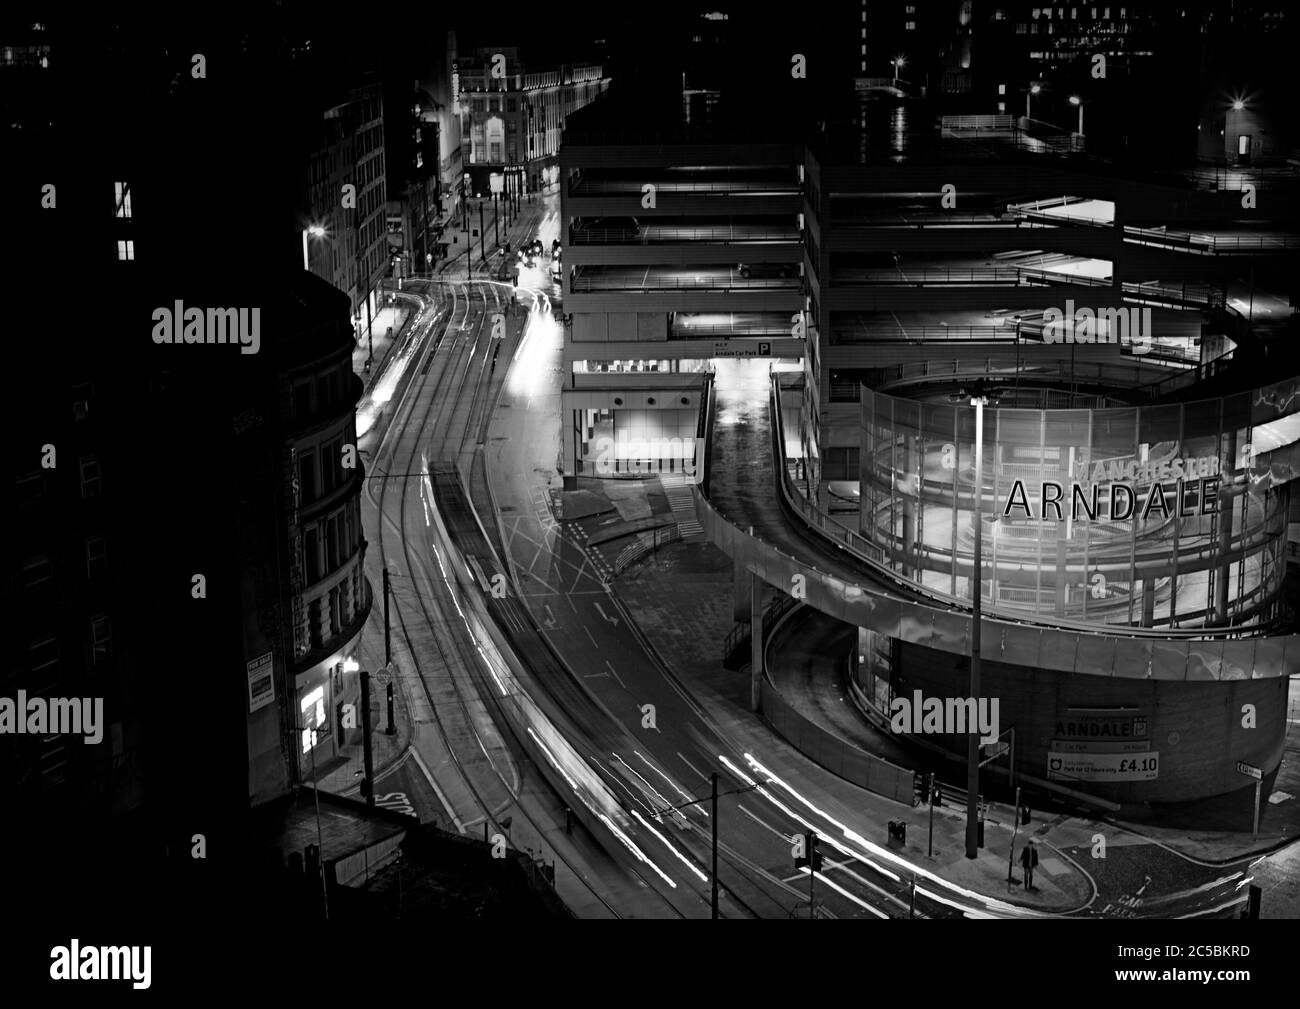 Night time street photography. Streets at night. Architecture, street lights, Arndale Centre, Manchester, car trails, time lapse, tram tracks Stock Photo